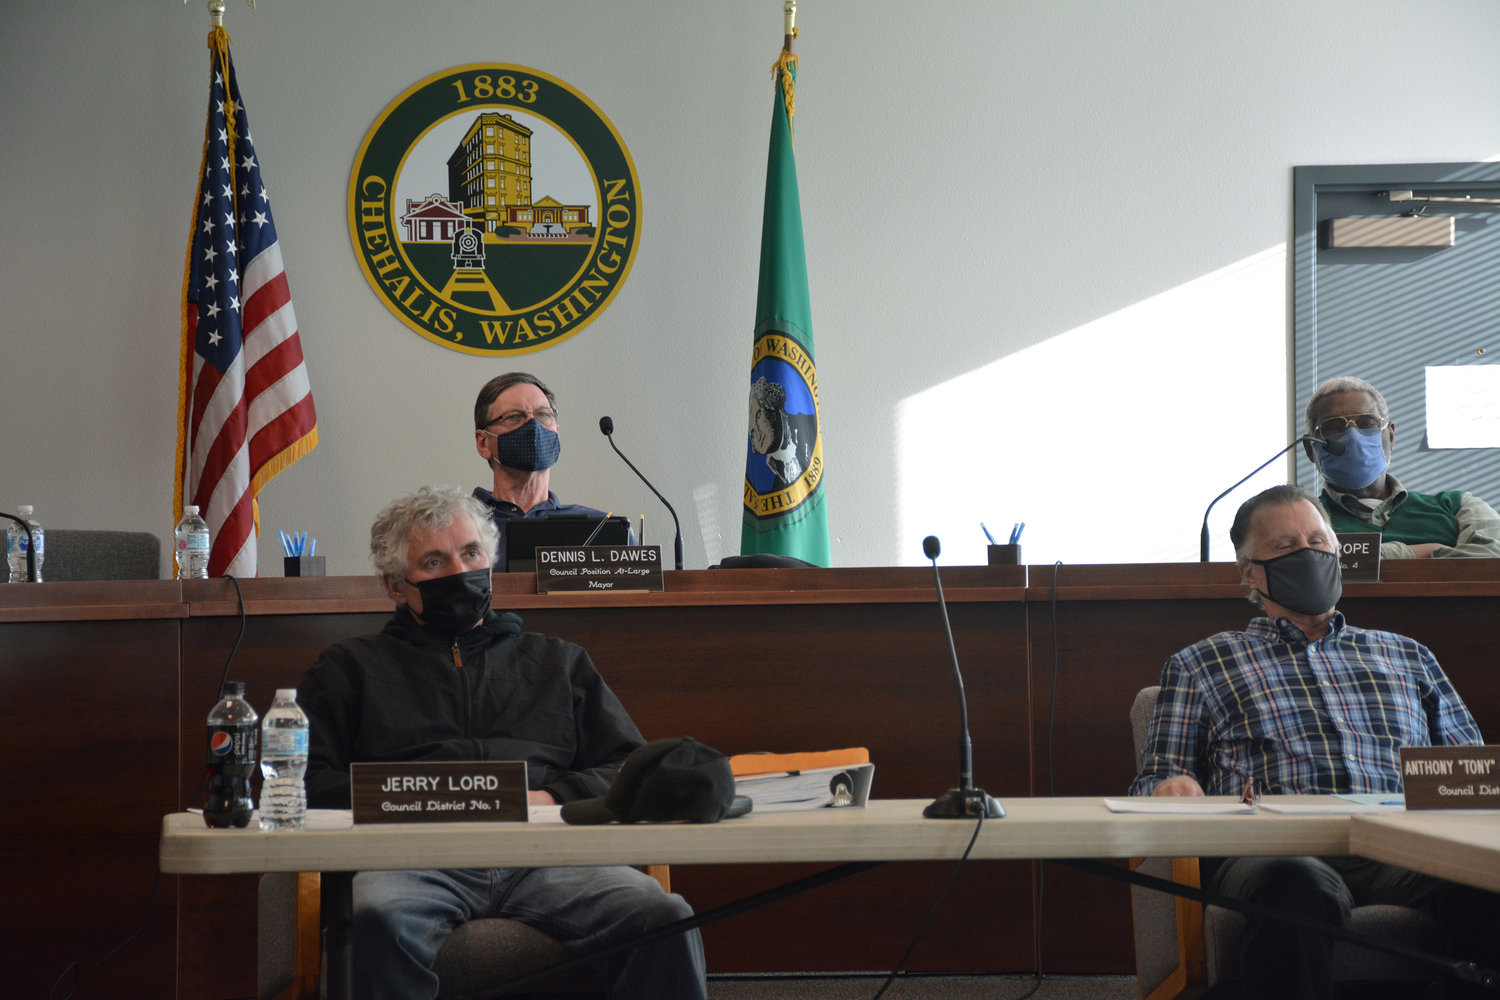 Chehalis city councilmembers listen to a member of the public’s critiques at a Monday meeting this week.